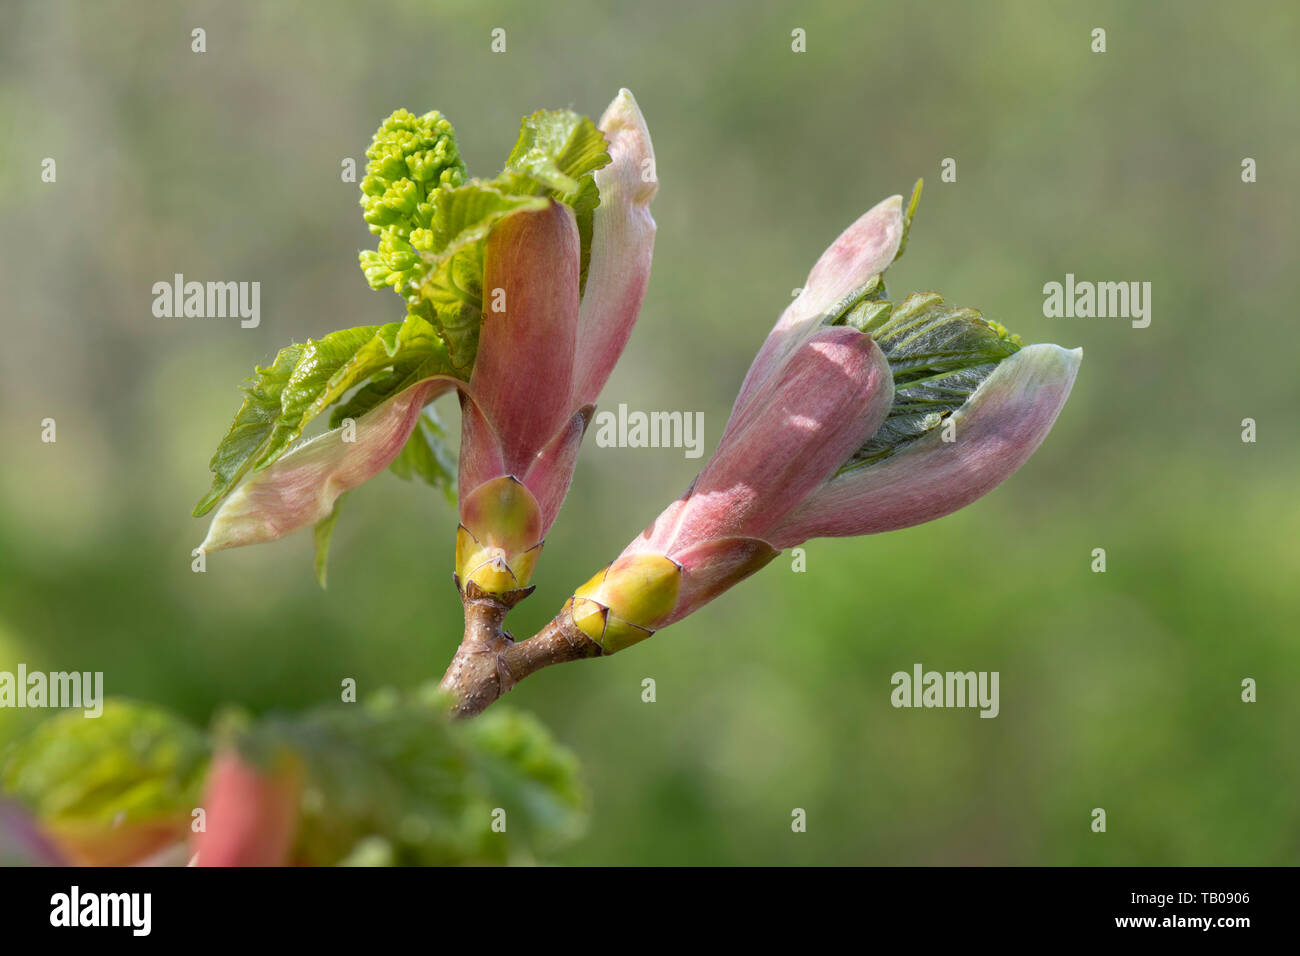 Newly Formed Flowers and Leaves Emerging From the Buds on a Sycamore (Acer Pseudoplatanus). Stock Photo